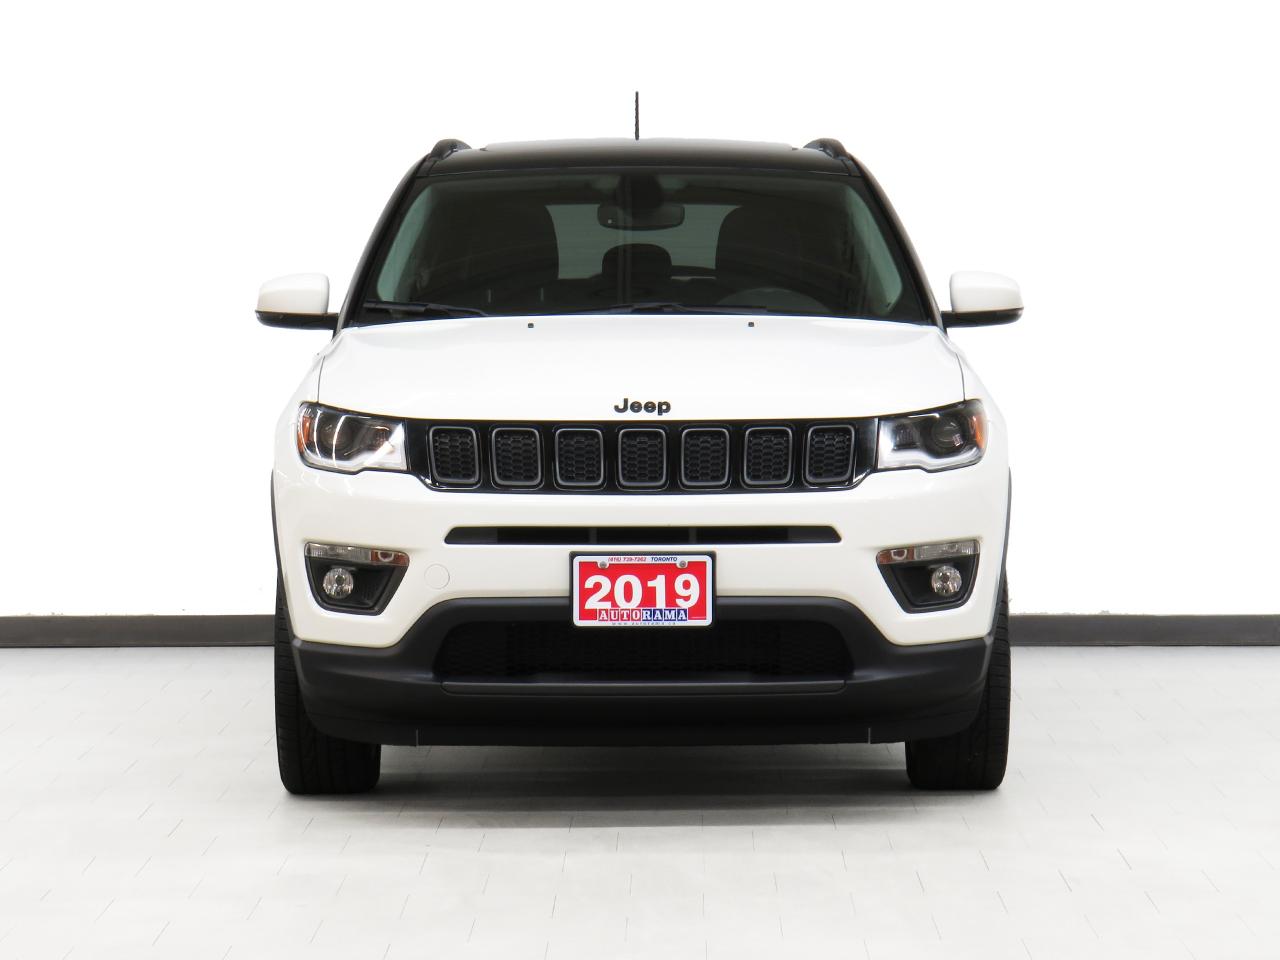 2019 Jeep Compass UPLAND | 4x4 | Backup Cam | Heated Steering